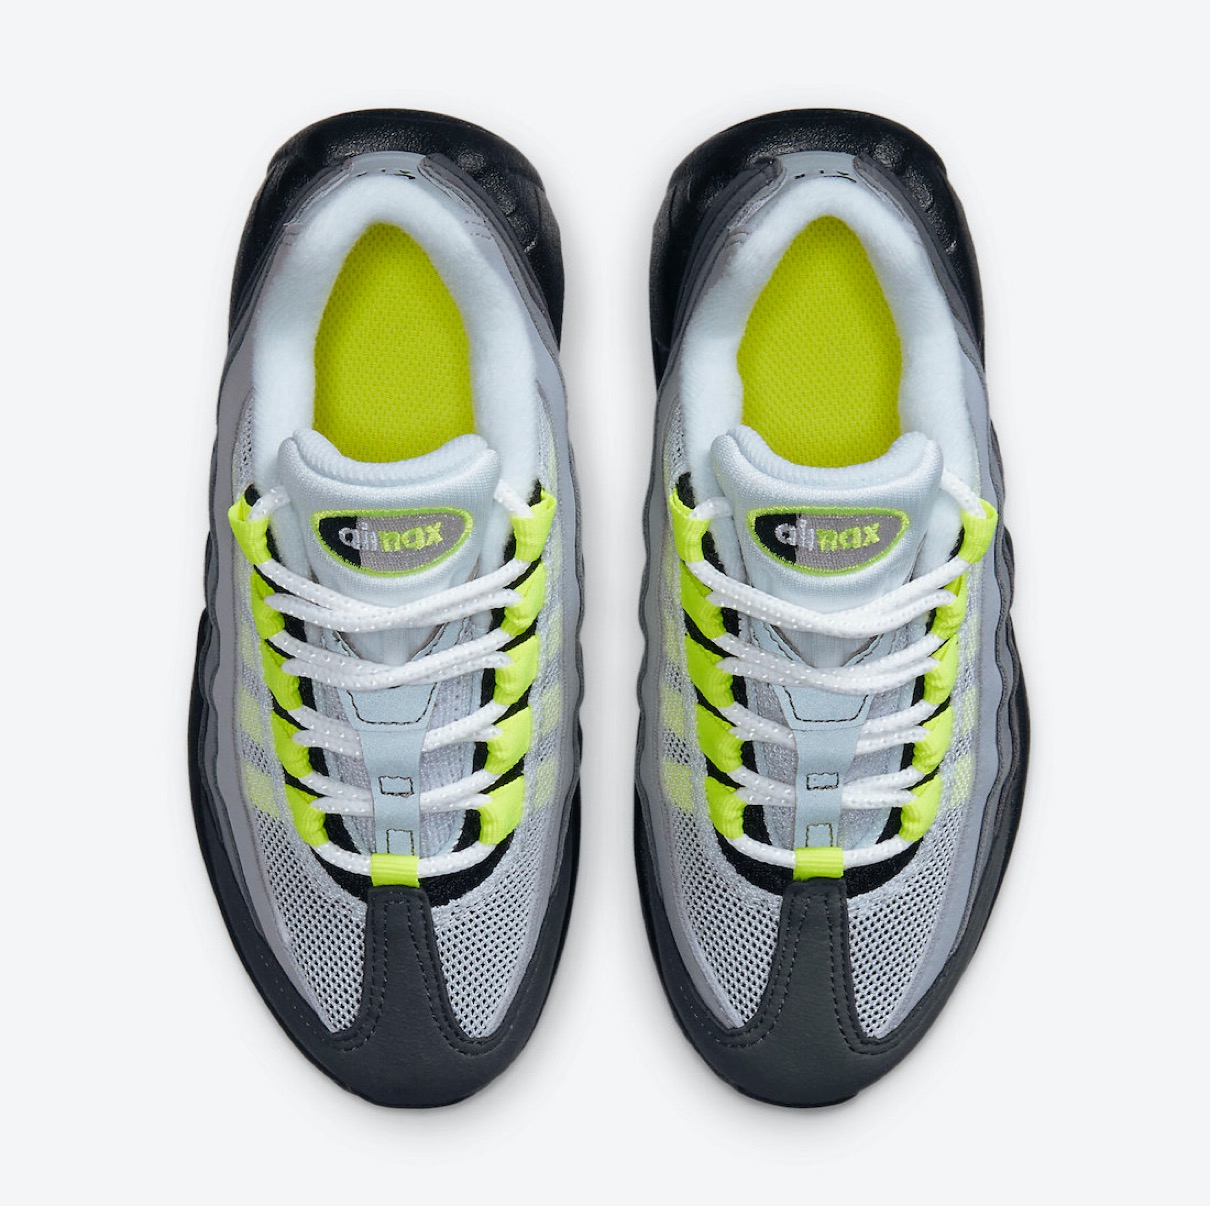 Nike Air Max 95 Og Neon 通称イエローグラデが国内年12月17日に復刻発売予定 Up To Date